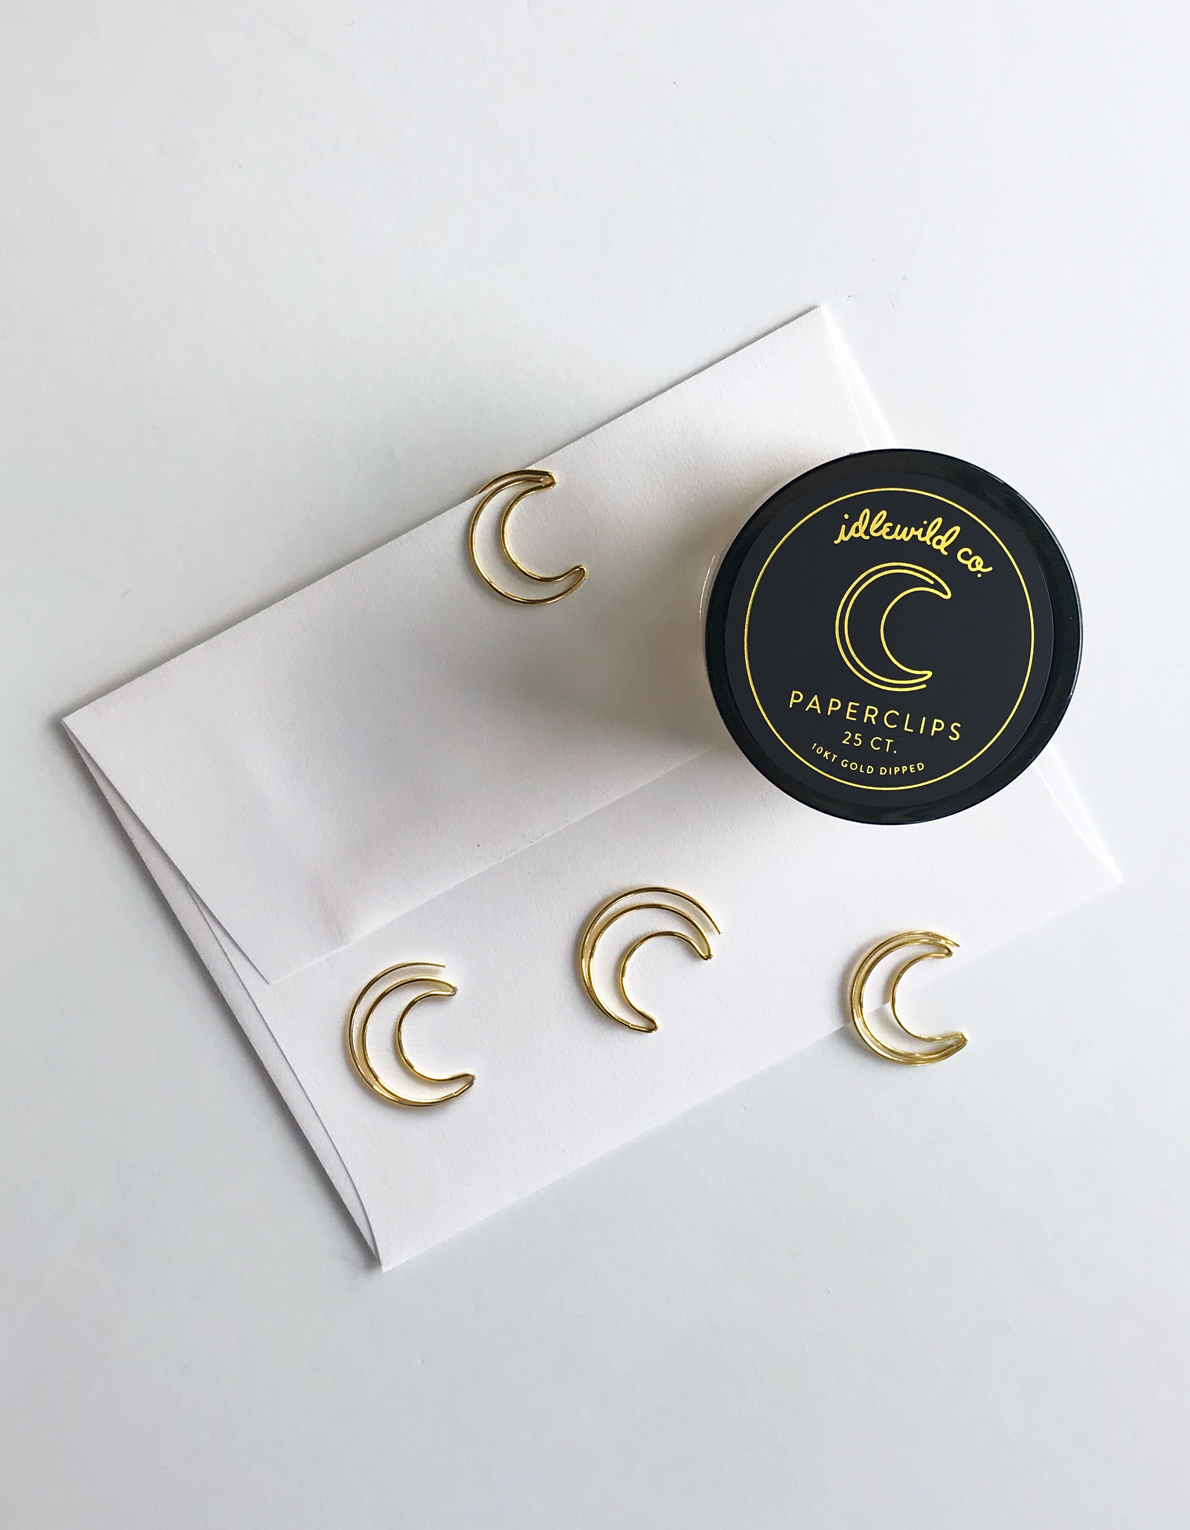 Crescent Moon Gold Plated Paper Clips – Idlewild Co.